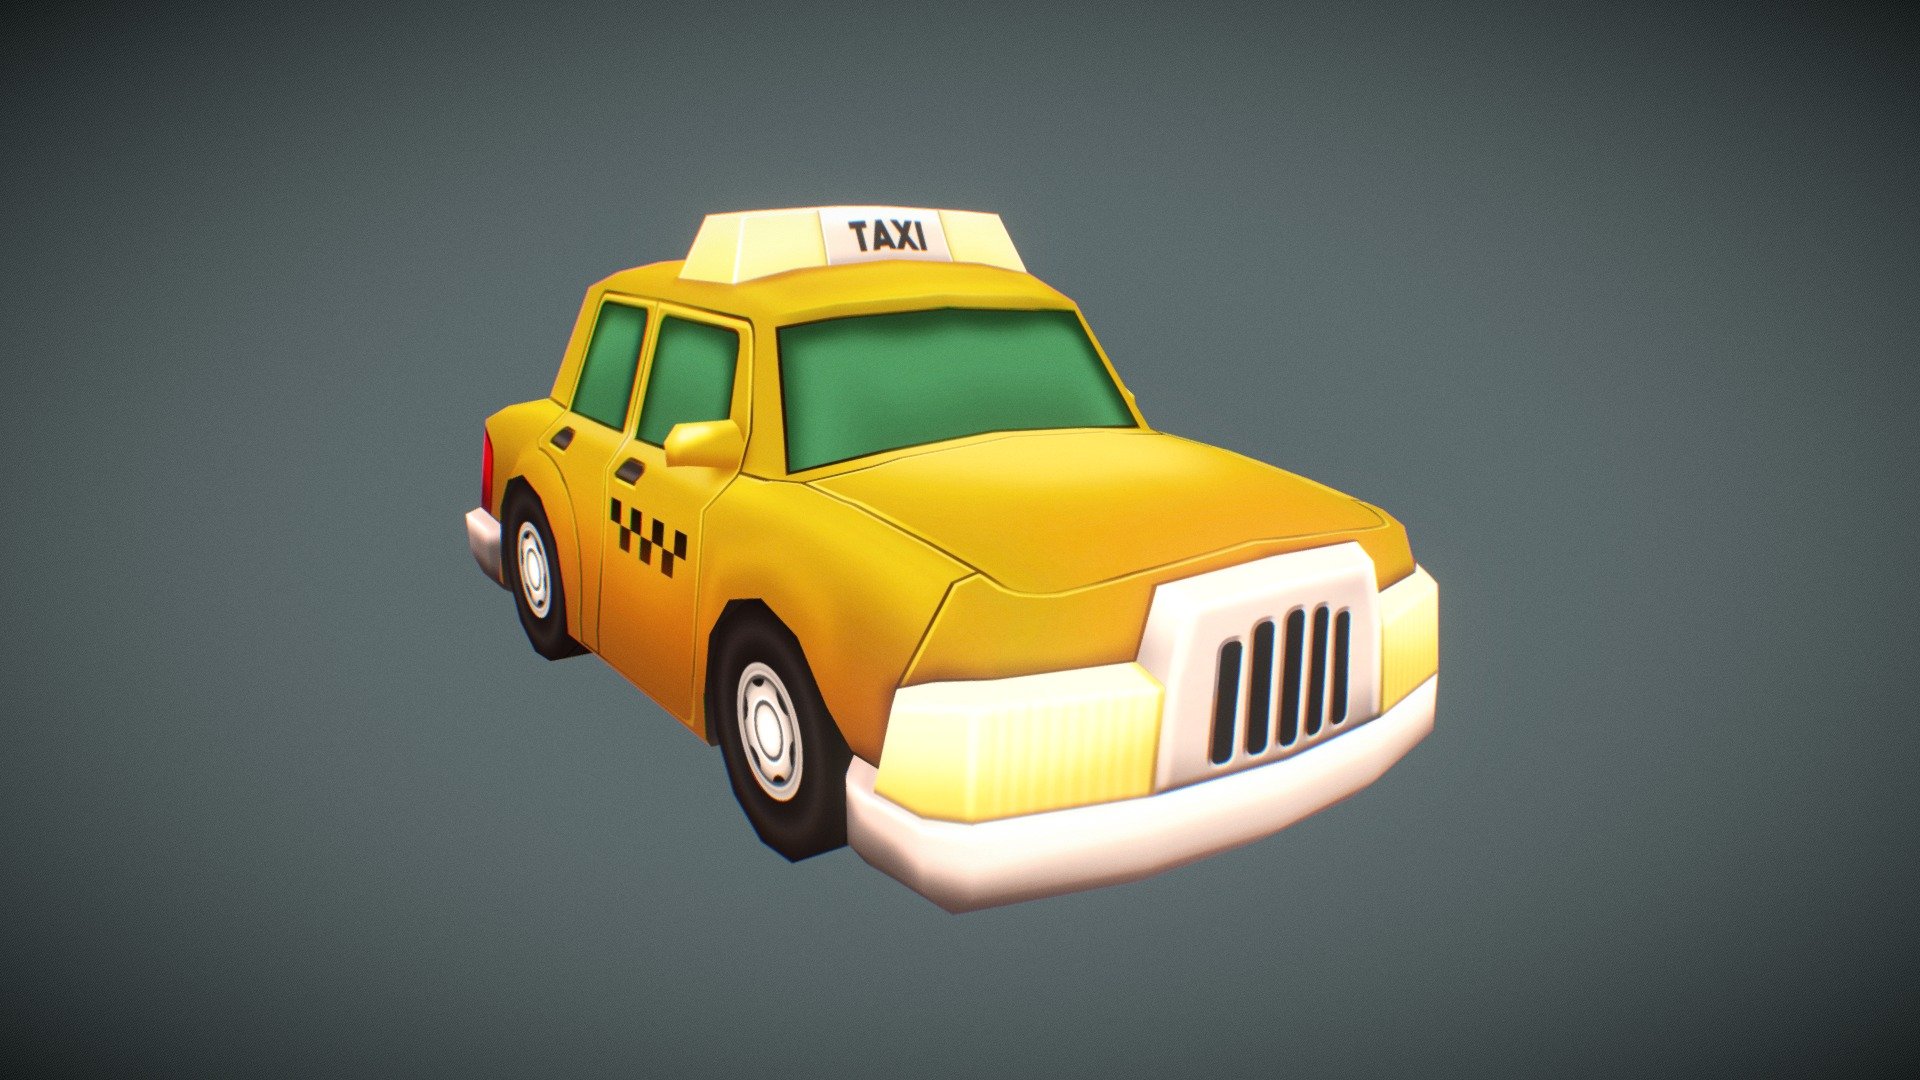 Low poly cartoon taxi. Modeled in Blender, textured in Photoshop 3d model